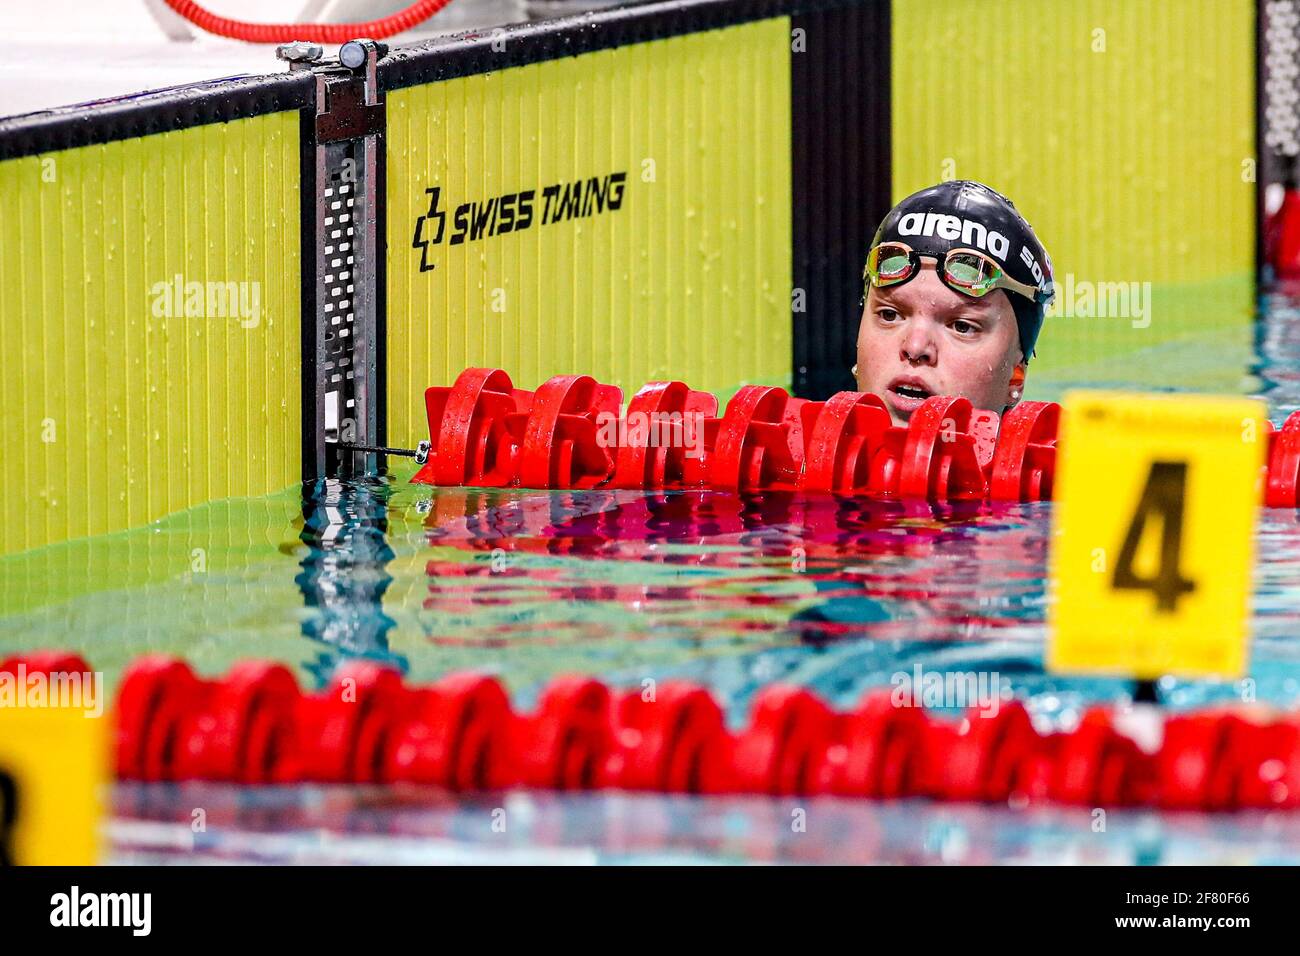 EINDHOVEN, NETHERLANDS - APRIL 10: Peggy Sonntag competing in the Women 100m Breaststroke Finals Para during the Eindhoven Qualification Meet at Piete Stock Photo